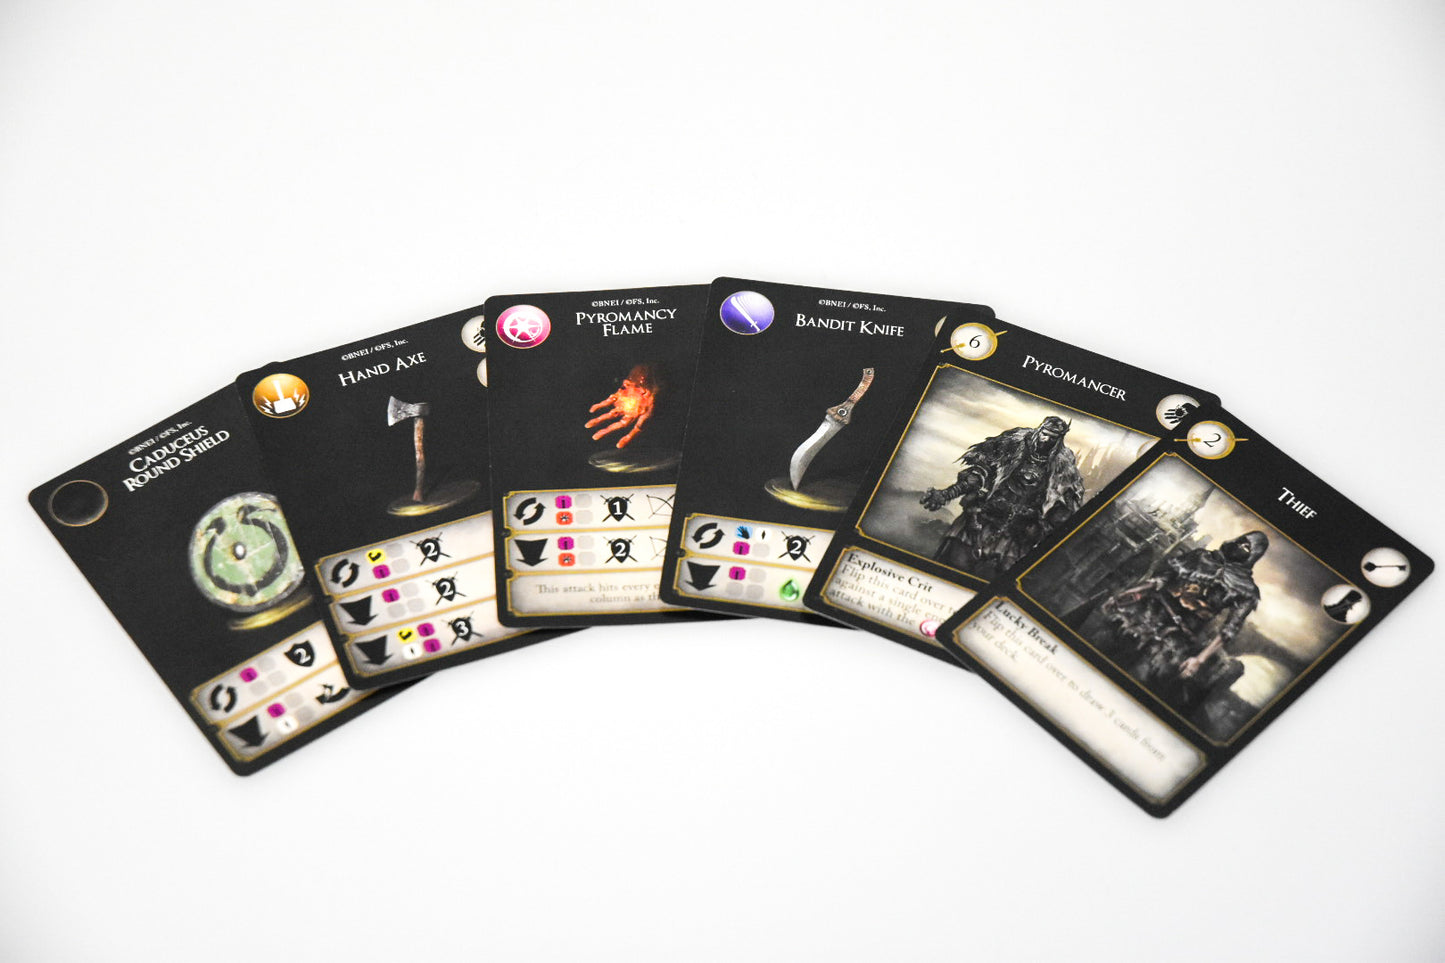 Dark Souls: The Card Game- Forgotten Paths Expansion